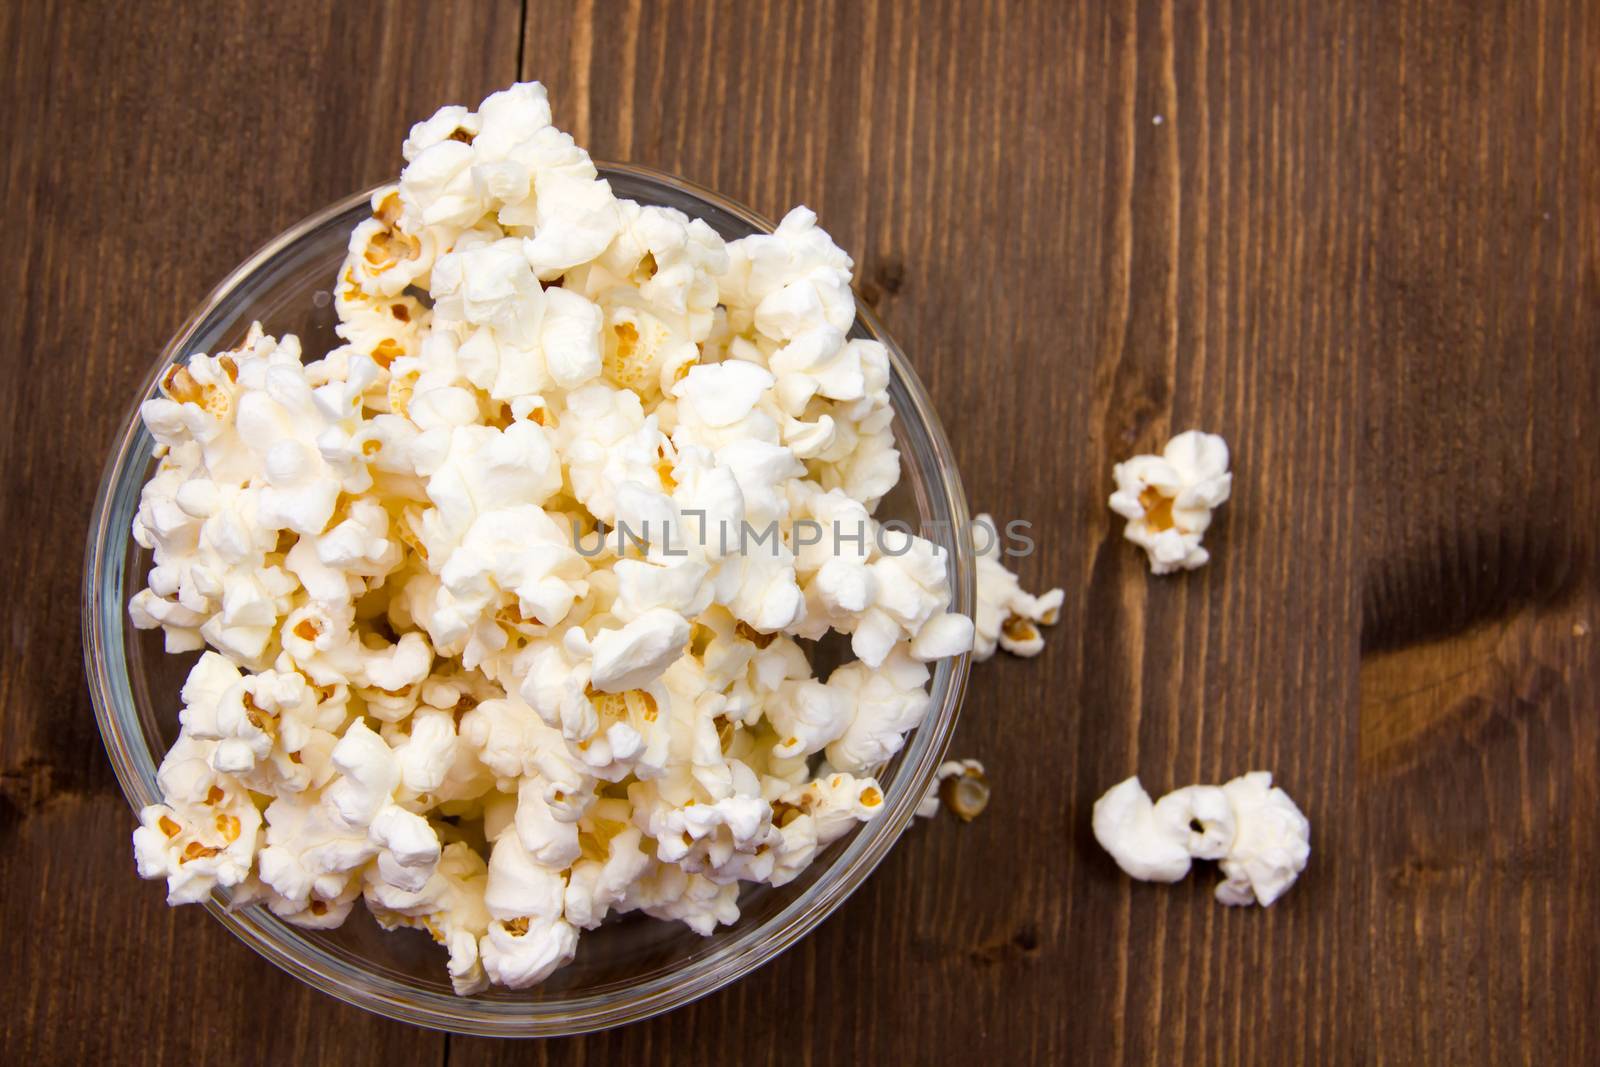 Popcorn in bowl on wooden table seen from above